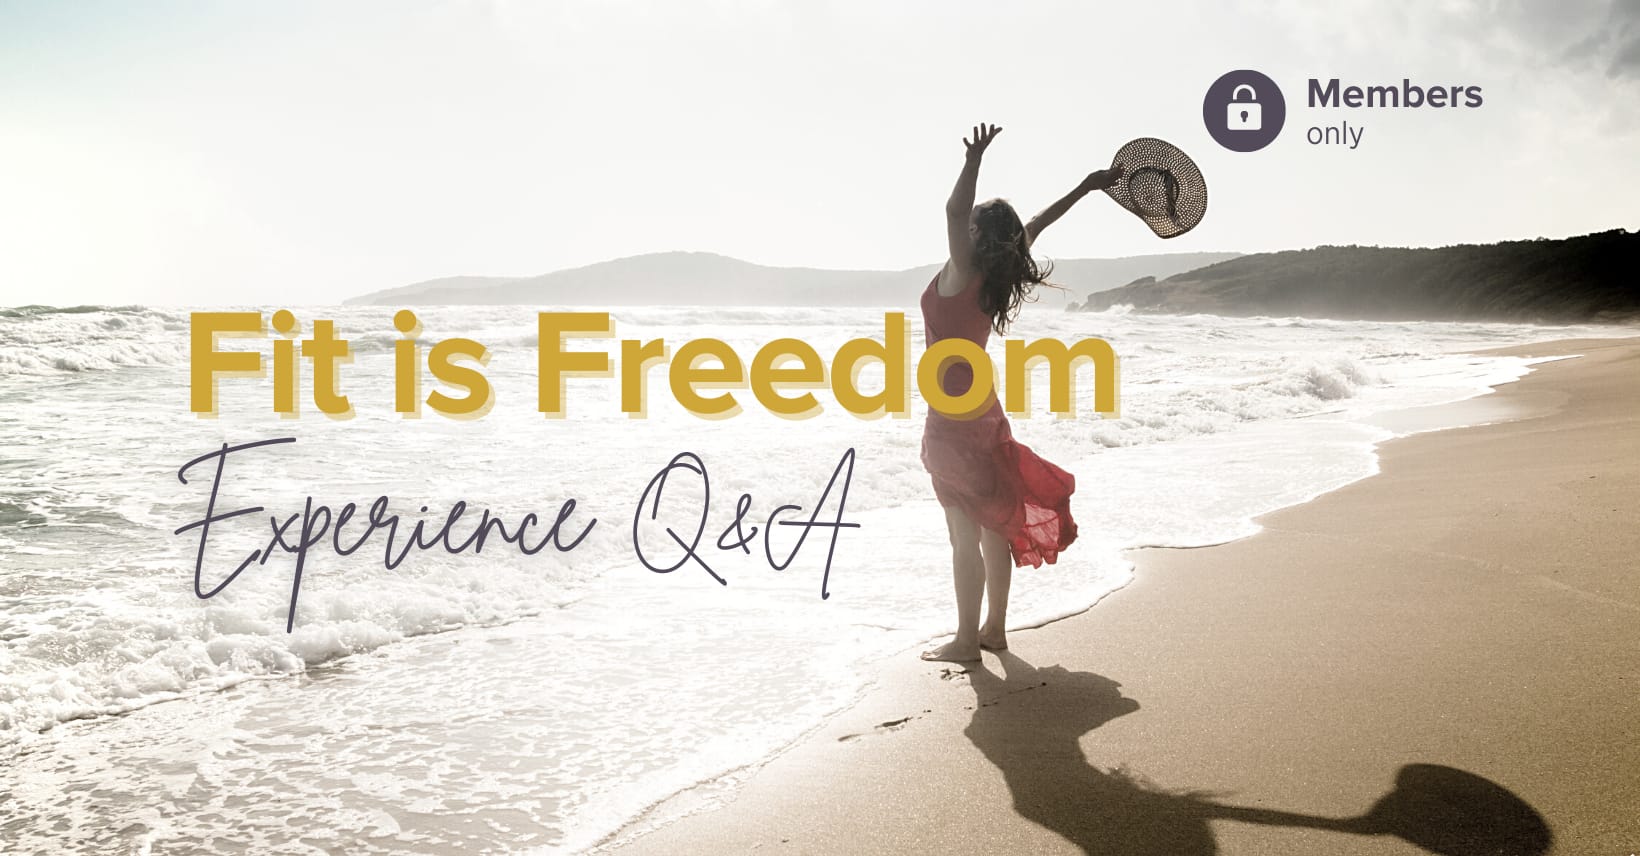 Fit is Freedom Experience Q&A header. ocean background, woman with hat reaching to sky on sand, members only